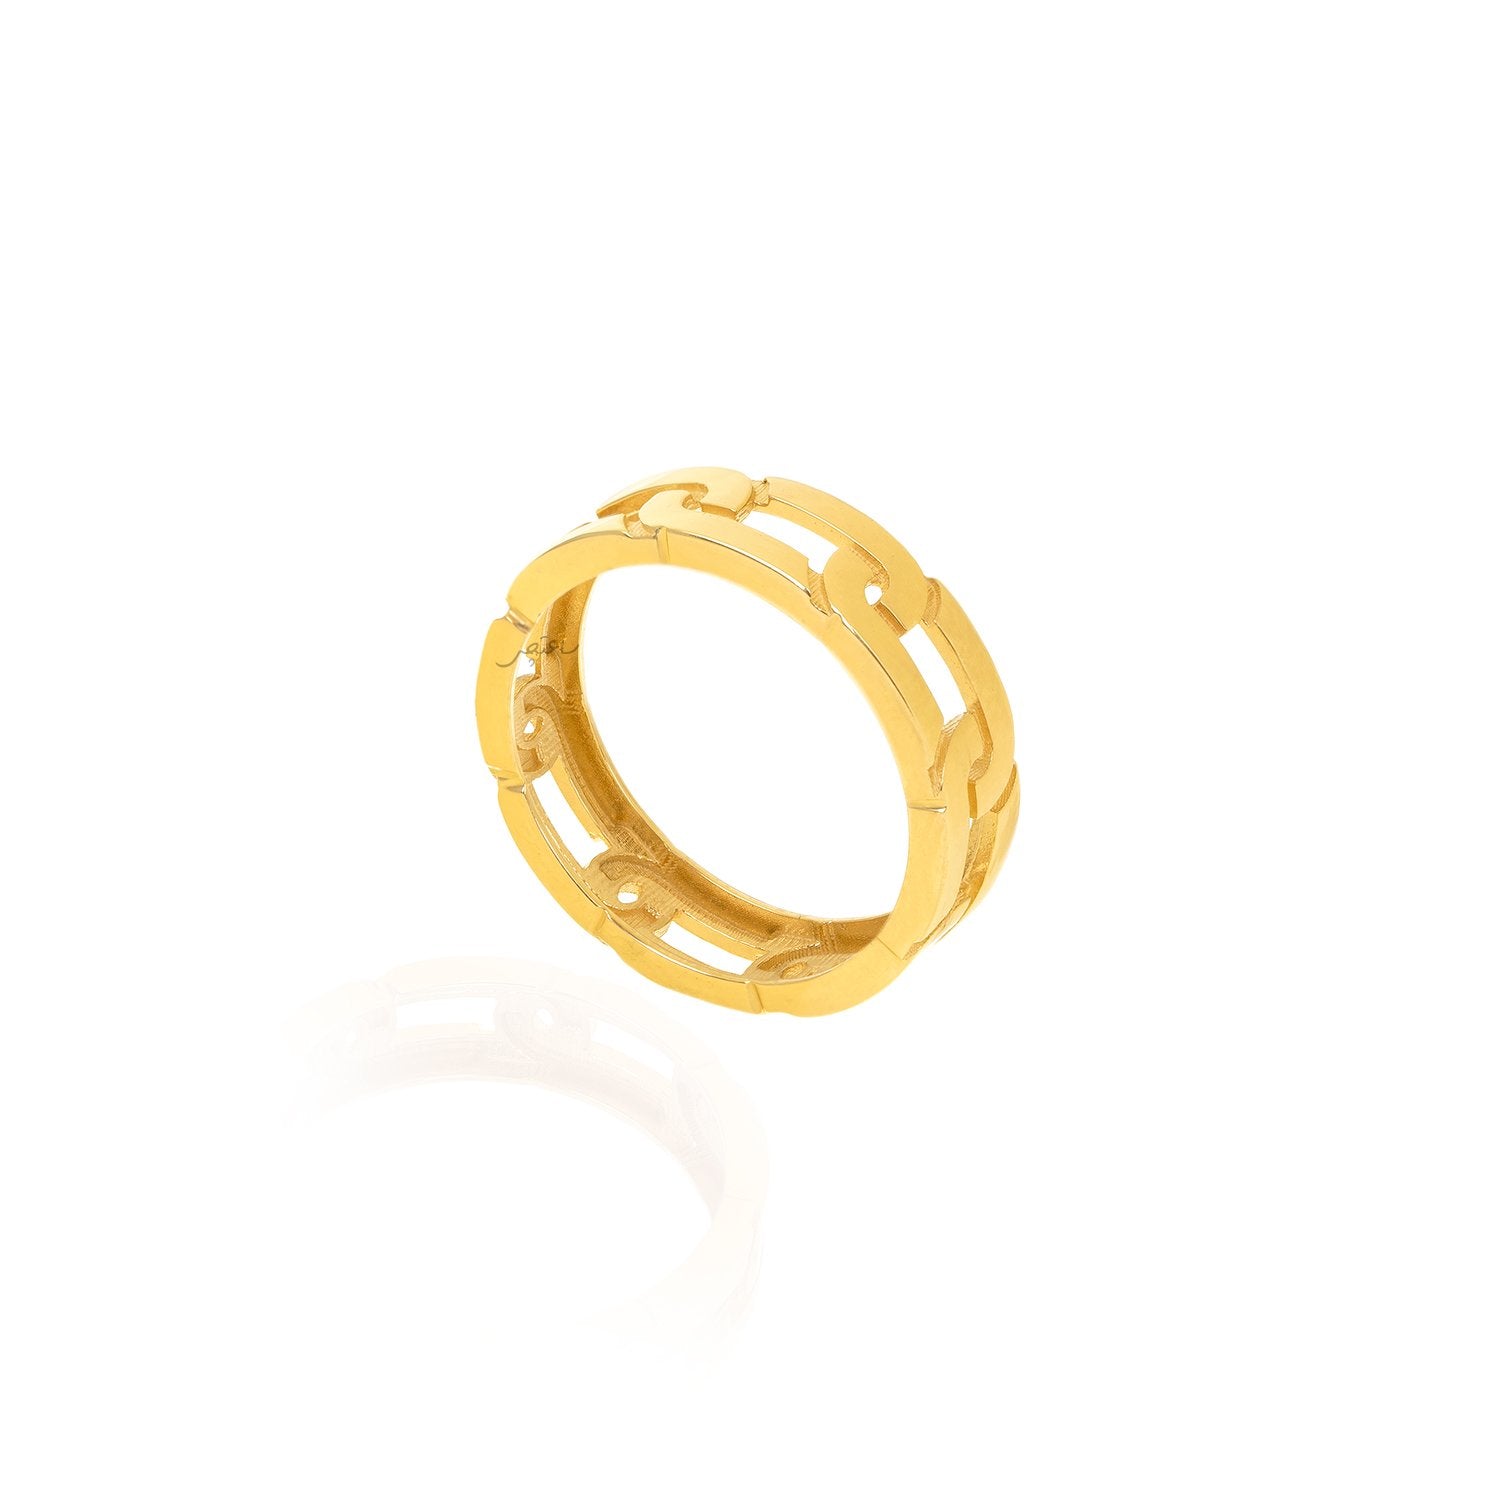 Yellow Gold Ring Oval Linked design 18k 2.54gr size 6